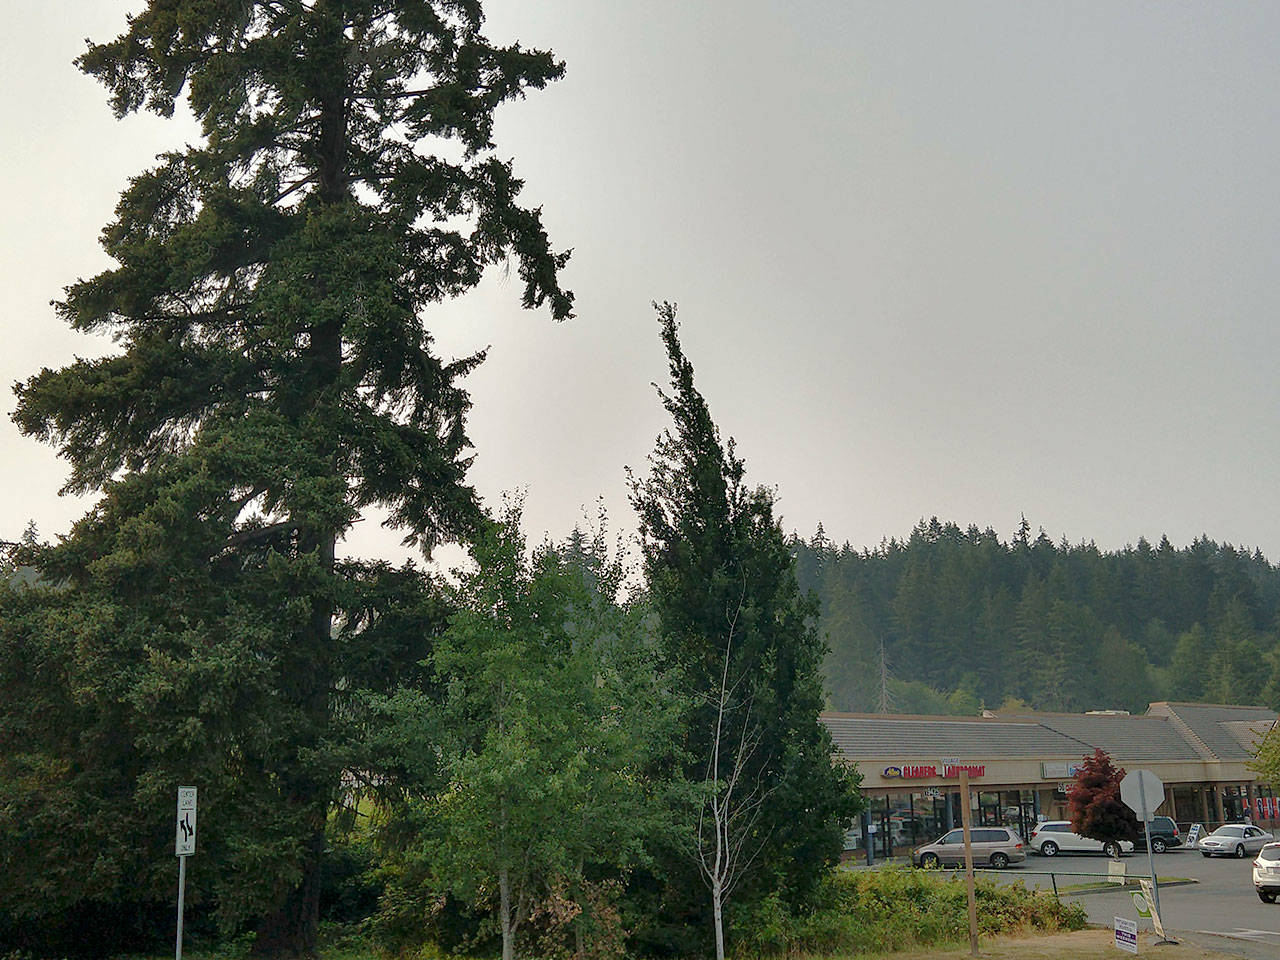 Dry weather: Air quality warning issued, Port Gamble forest park closed